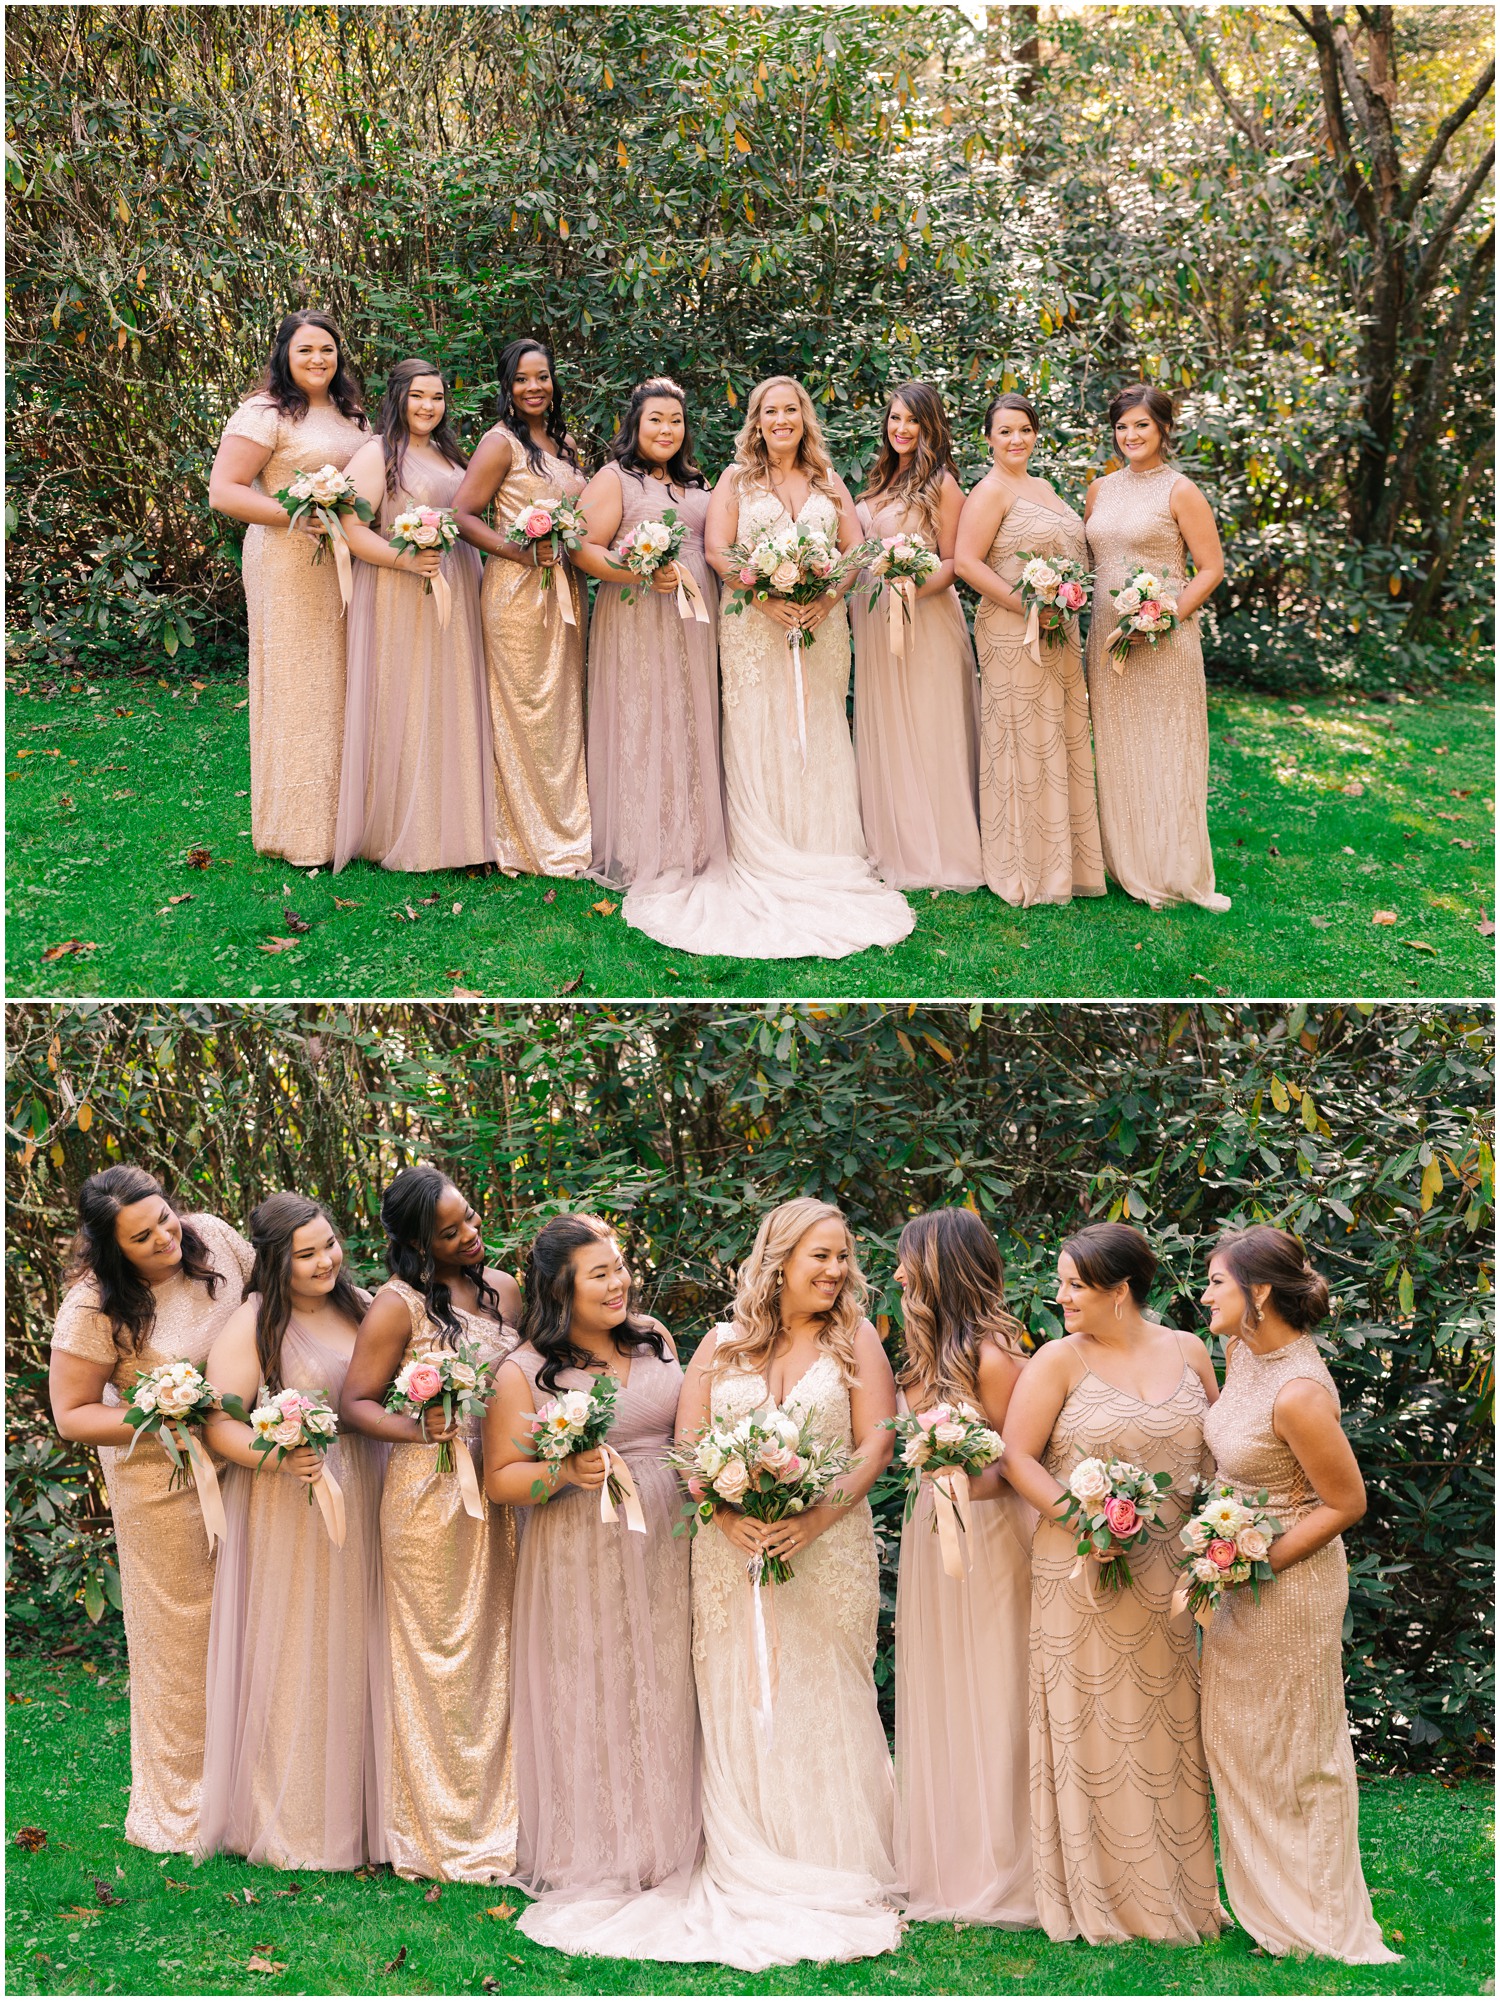 bridesmaids in mis-matched gowns in pinks, rose golds, and champagne colors smile at bride